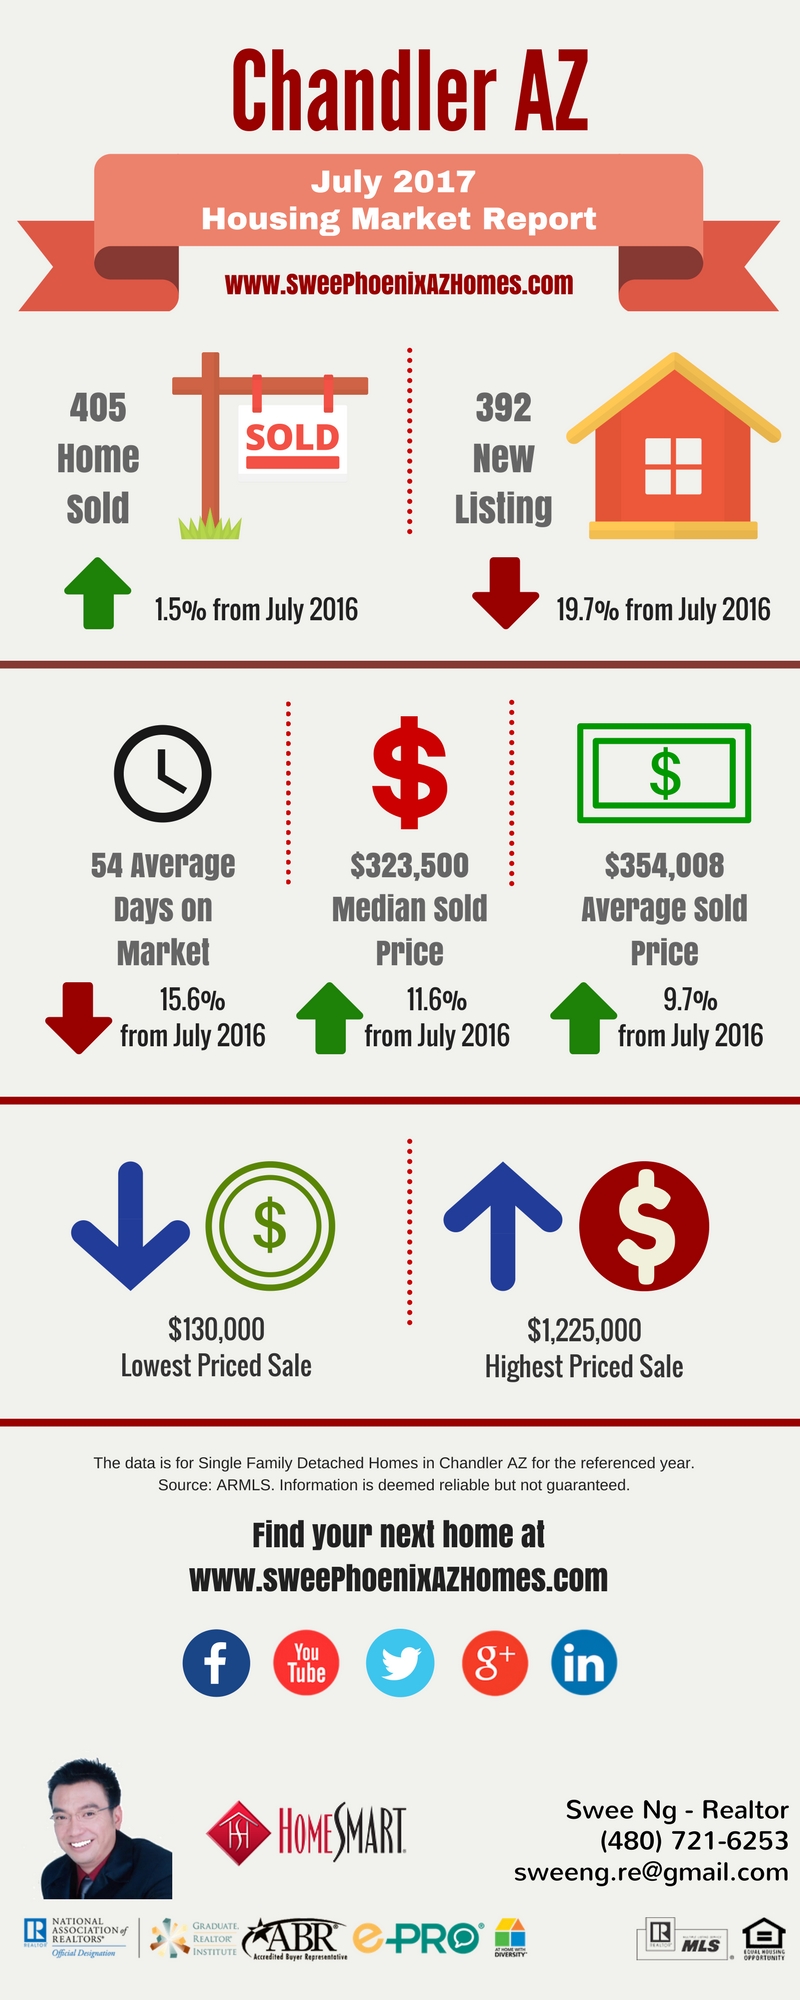 Chandler AZ Housing Market Update July 2017 by Swee Ng, House Value and Real Estate Listings